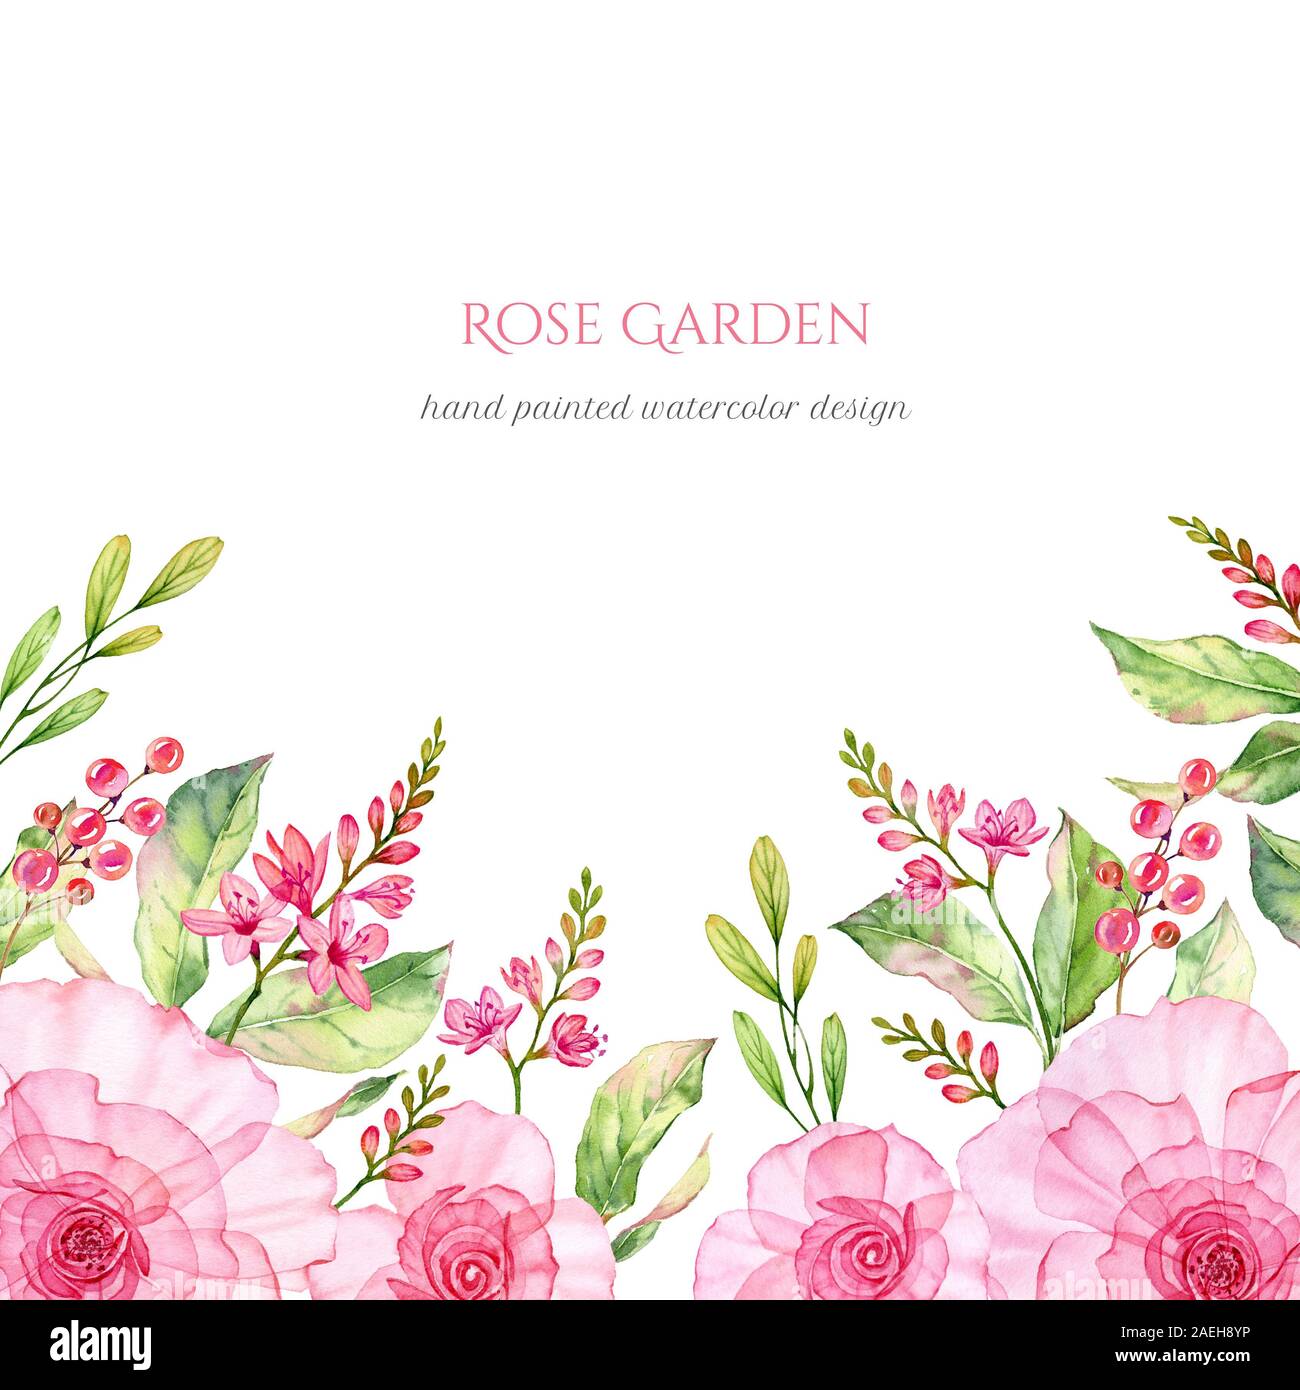 Rose Garden bottom border and place for text. Watercolor transparent colorful flowers isolated in white. Botanical floral square background for Stock Photo